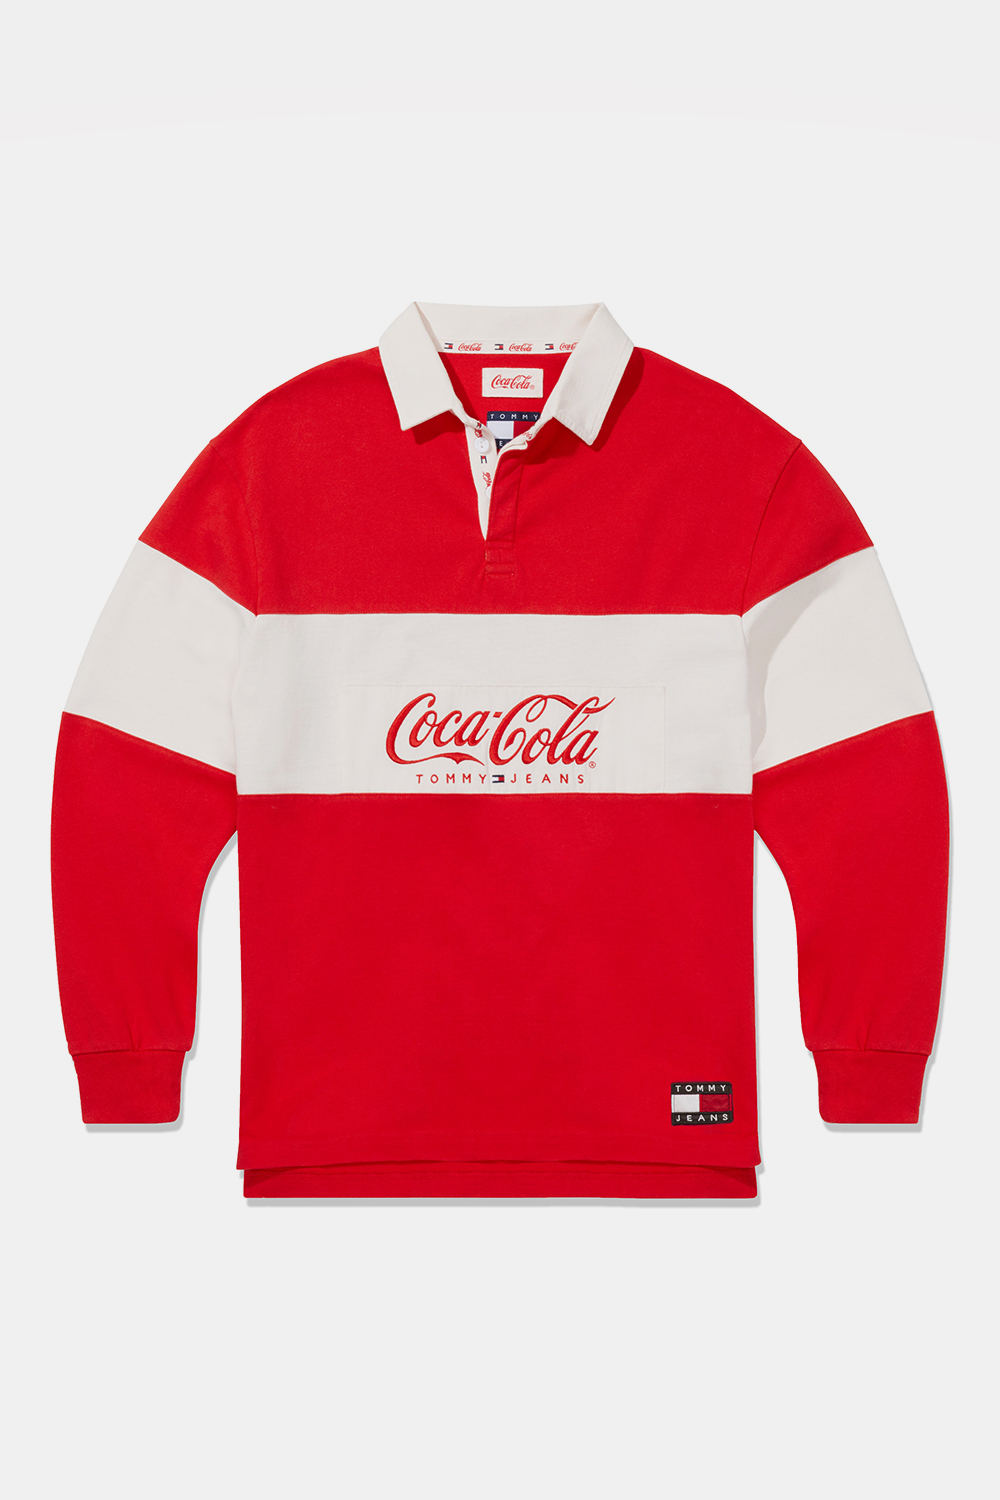 Tommy Jeans x Coca-Cola SS19 Collection: Here